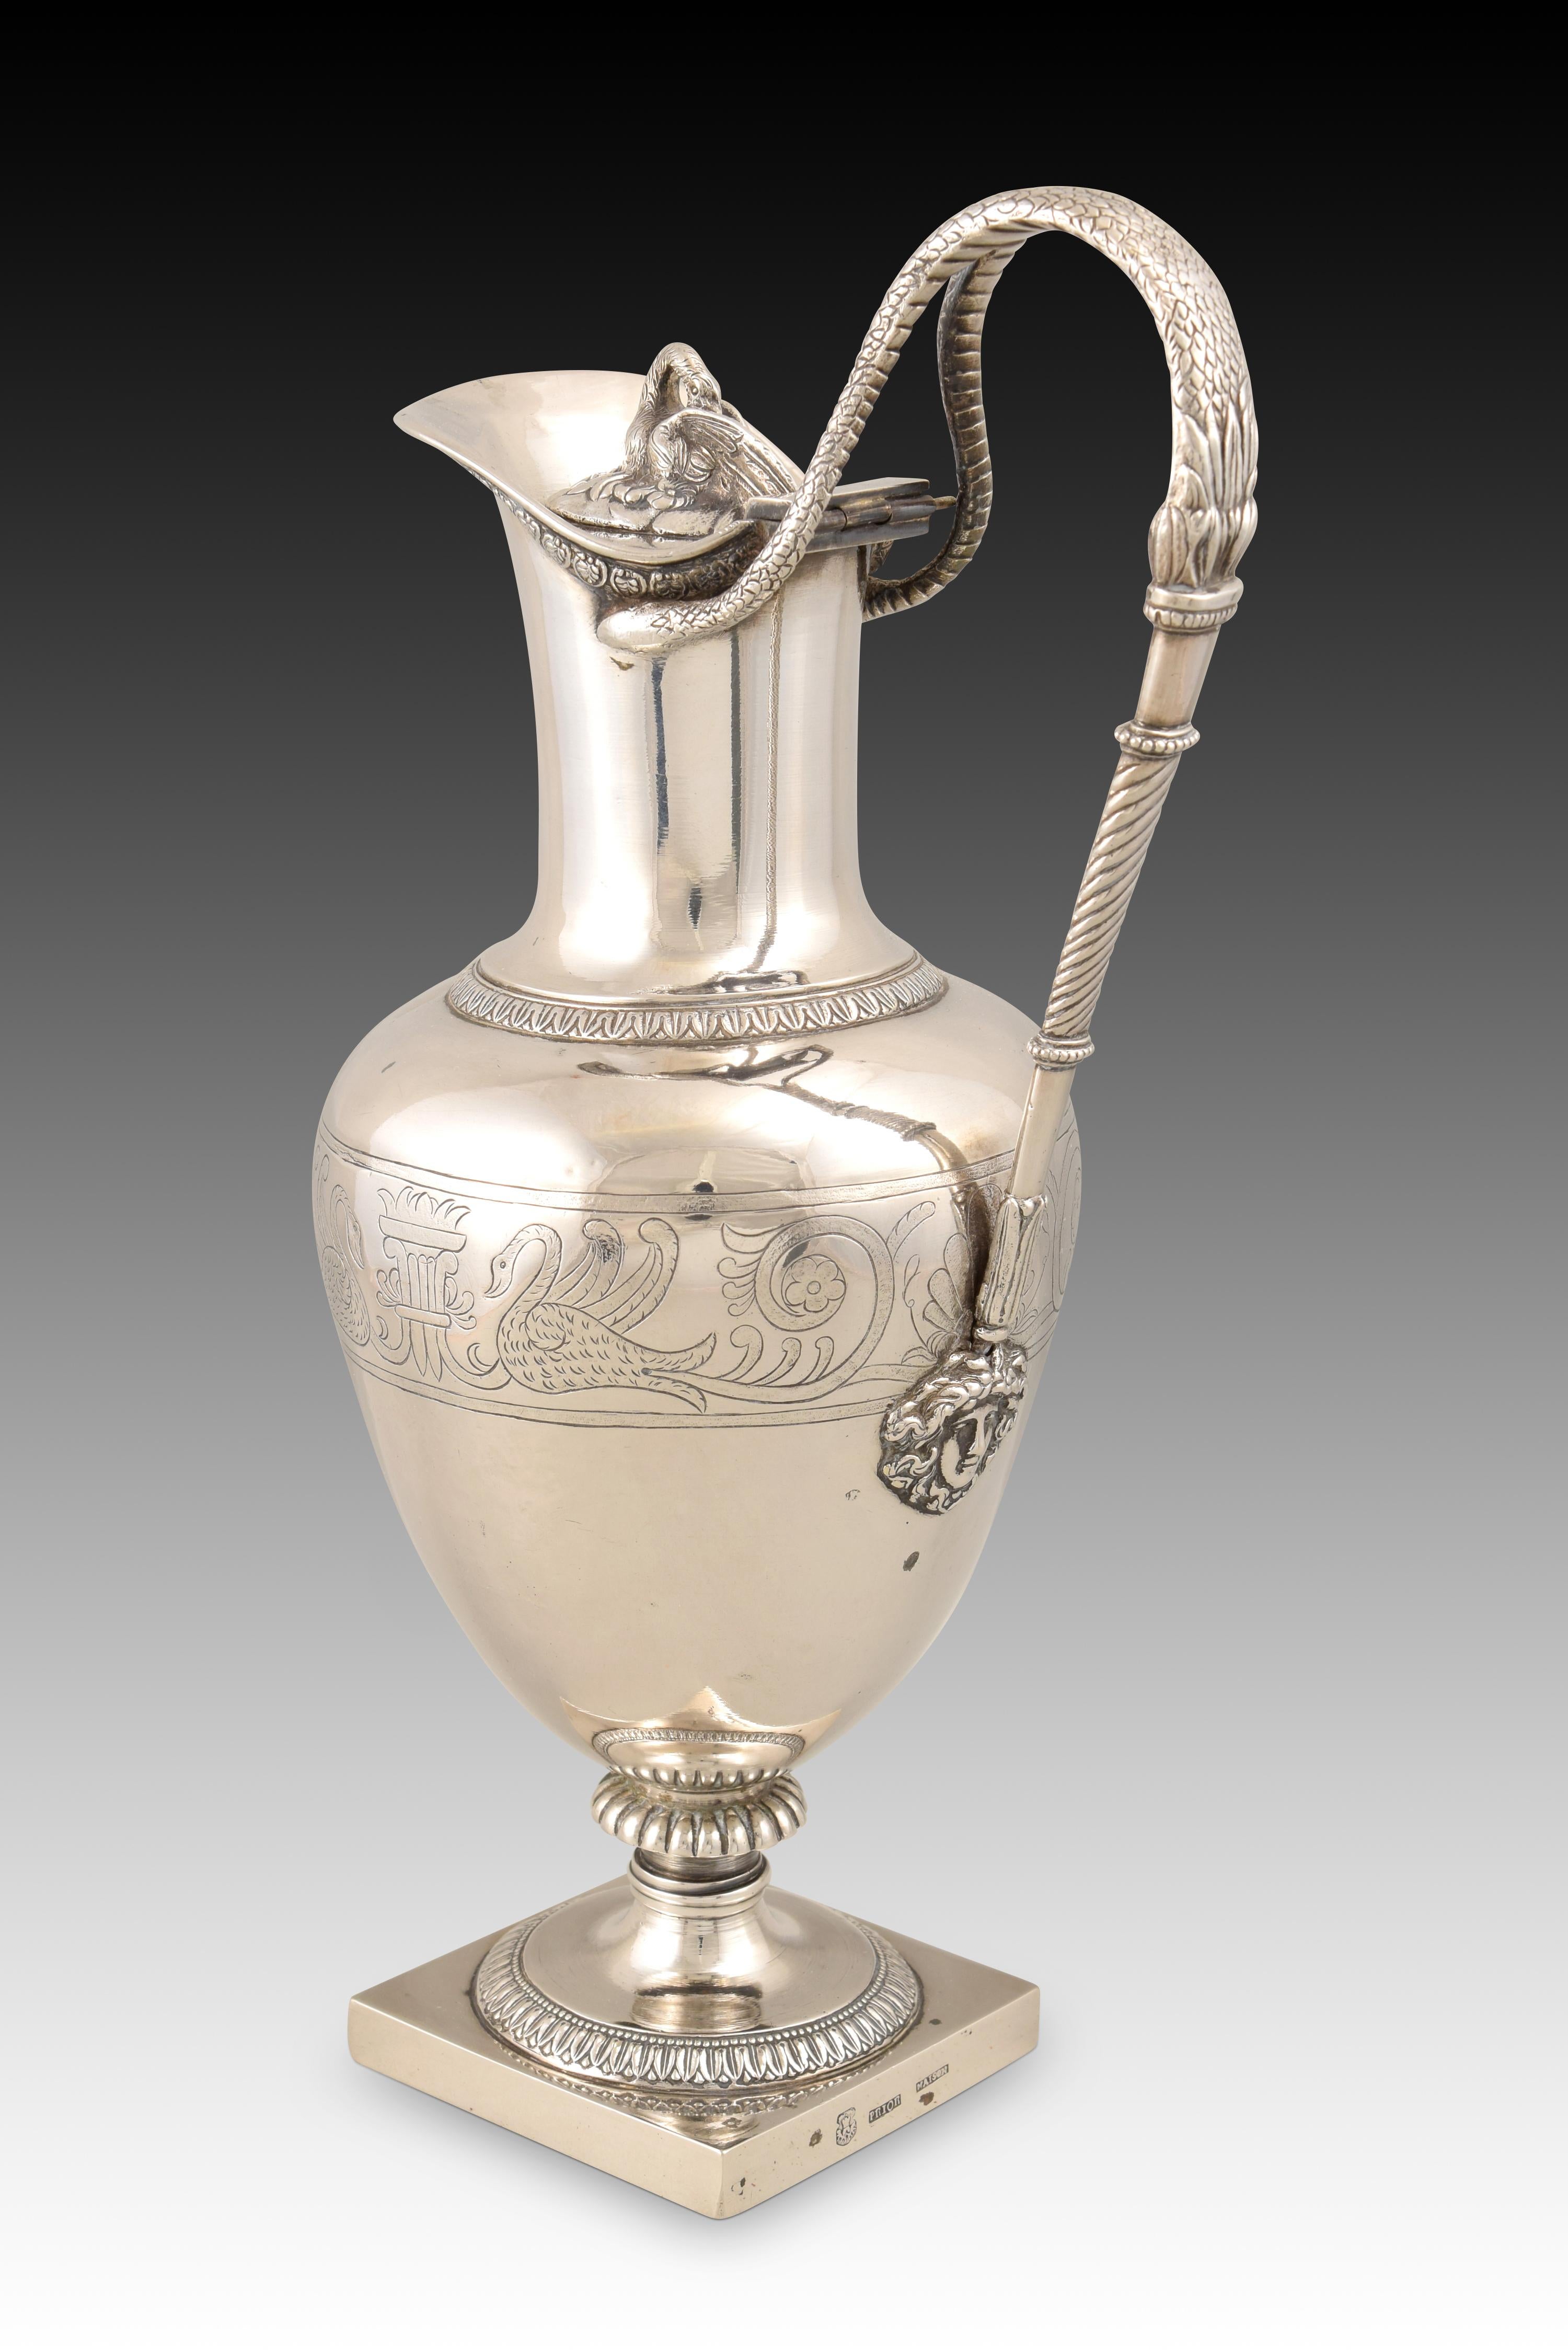 Jug. Silver. Anselm Prior and Mason. Vitoria, Spain, between 1816 and 1846. 
With contrast markings. 
Silver jug in its color with a square base that serves as a support for the circular foot decorated with a band of ova and that ends in a gallon